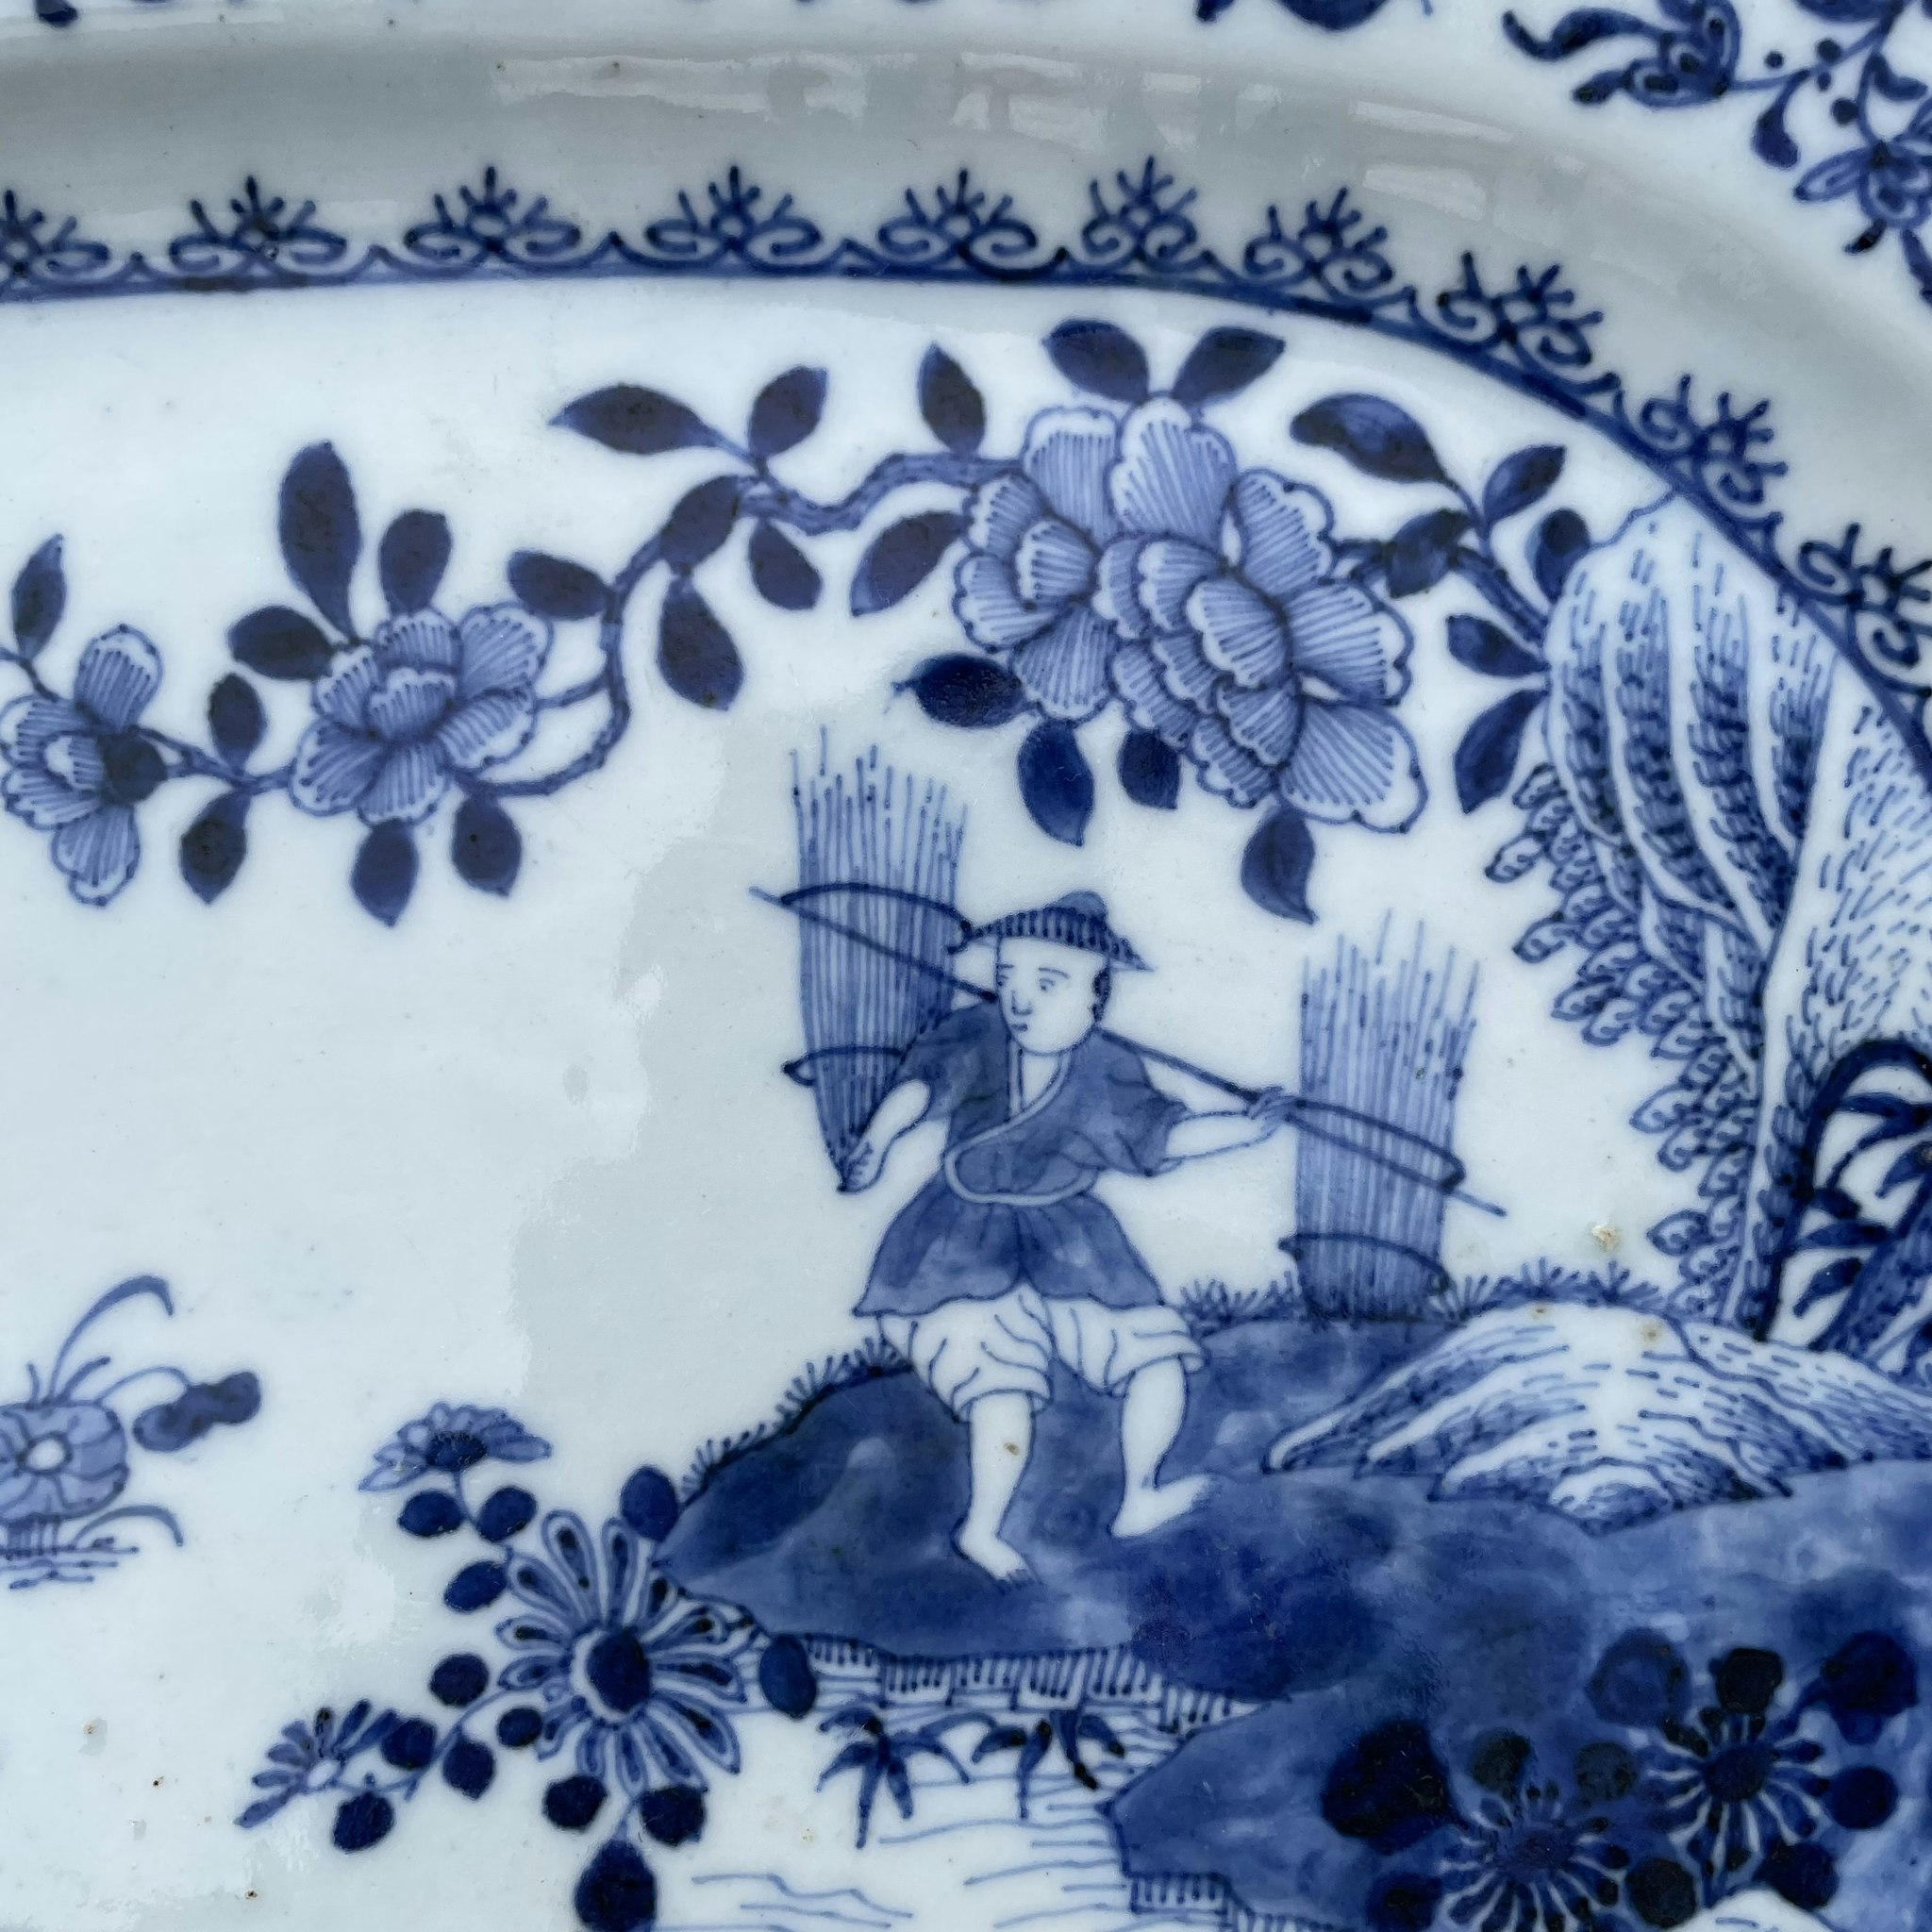 Chinese Antique blue and white porcelain platter, 18th C Qianlong period #1695